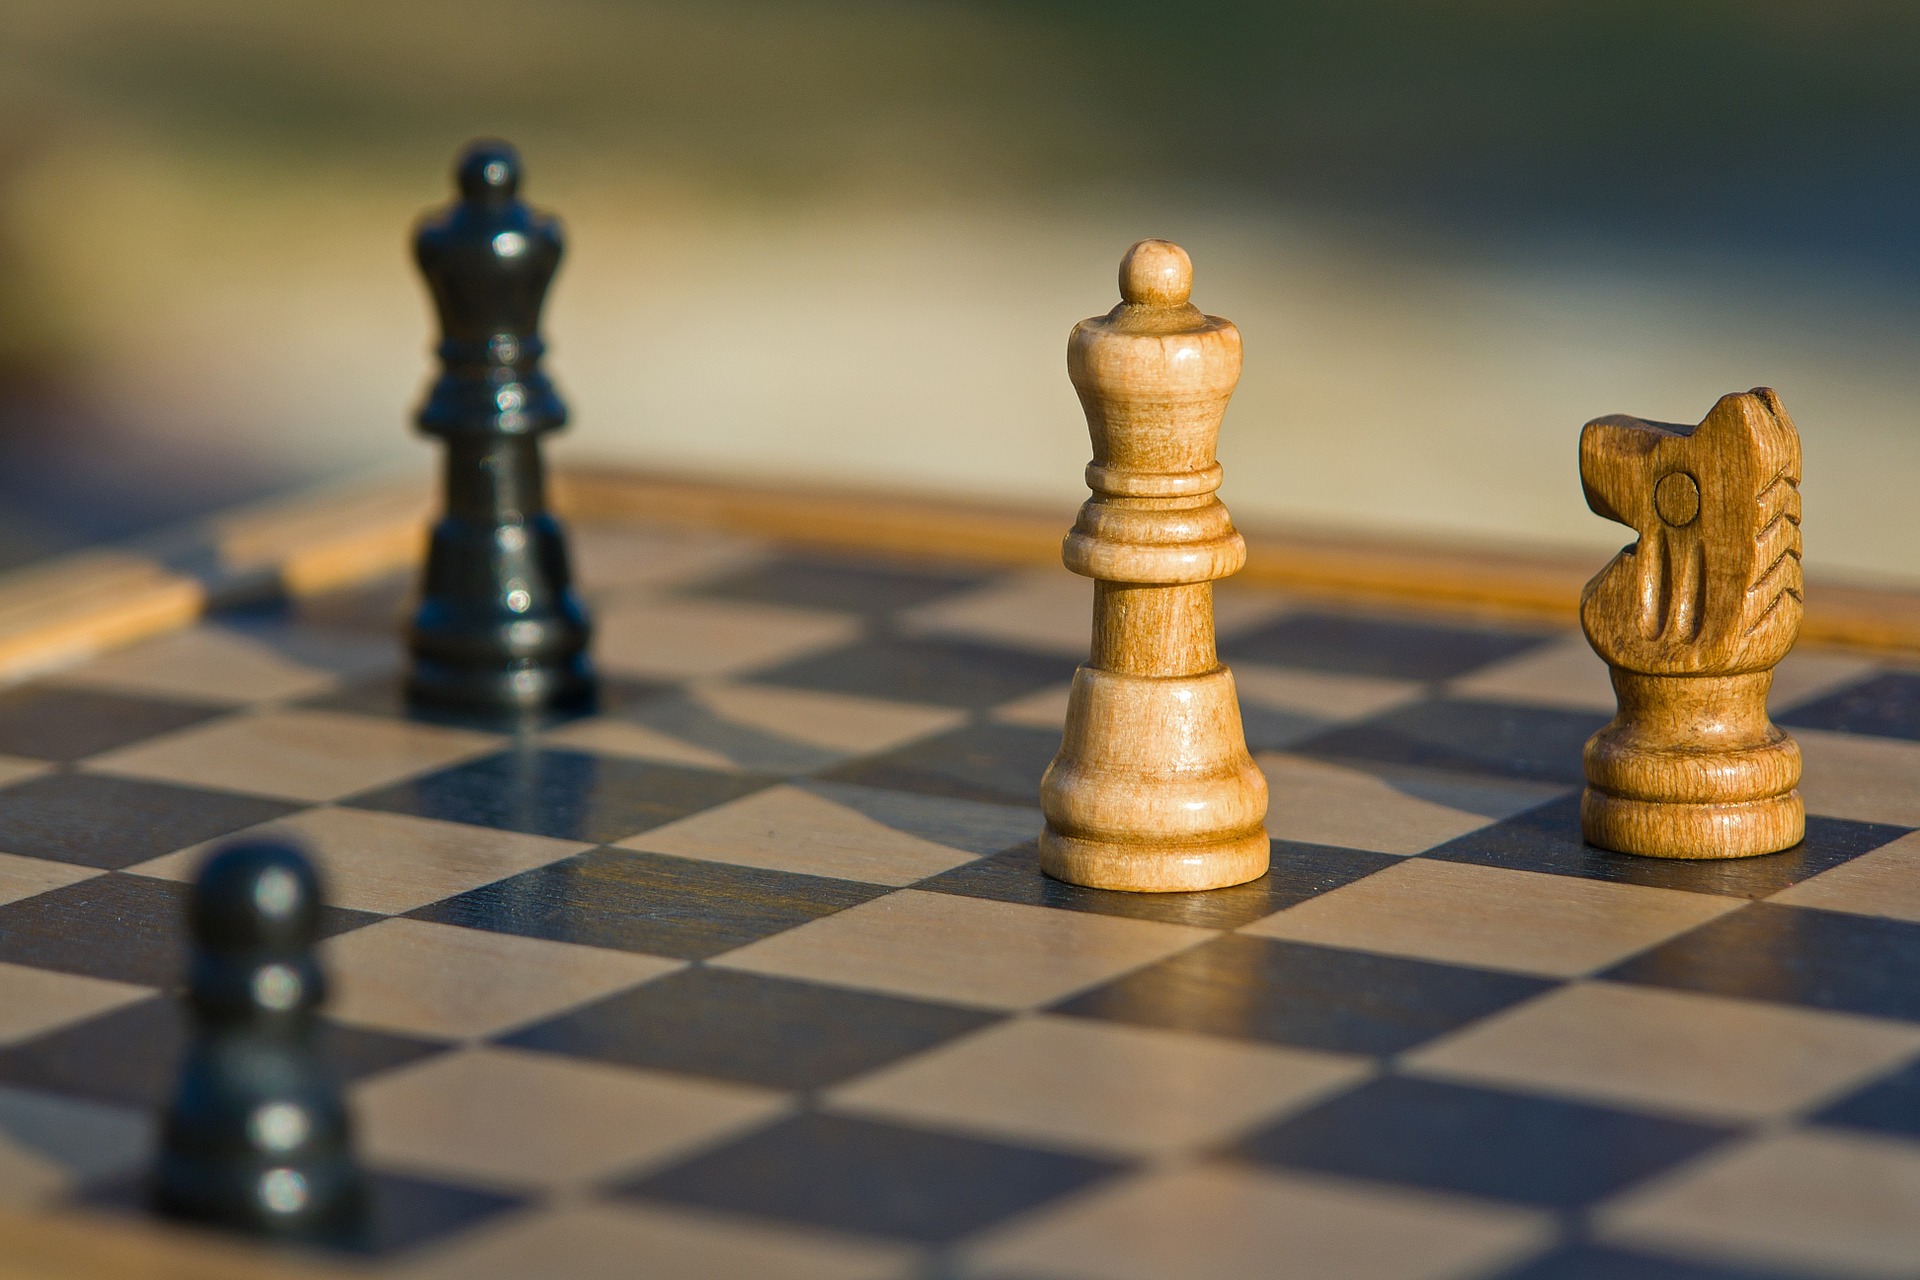 Chess Piece Names and Moves: A Parent's Guide to Teaching Chess - In The  Playroom